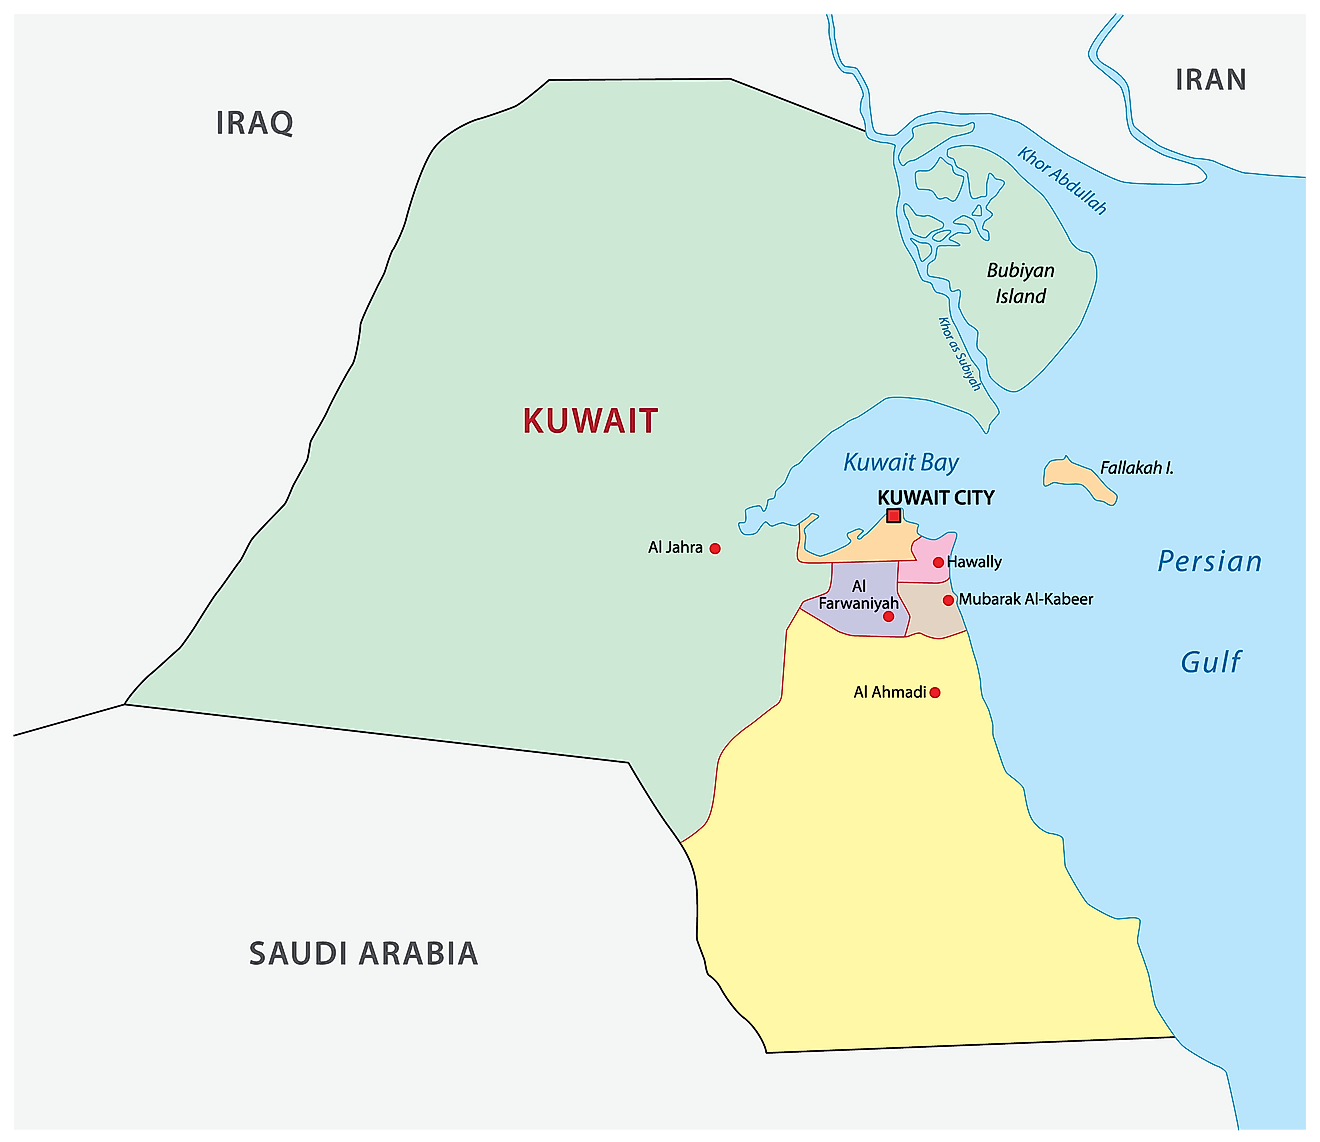 Political Map of Kuwait showing the 6 governorates of the country, their capitals, and the national capital of Kuwait City.